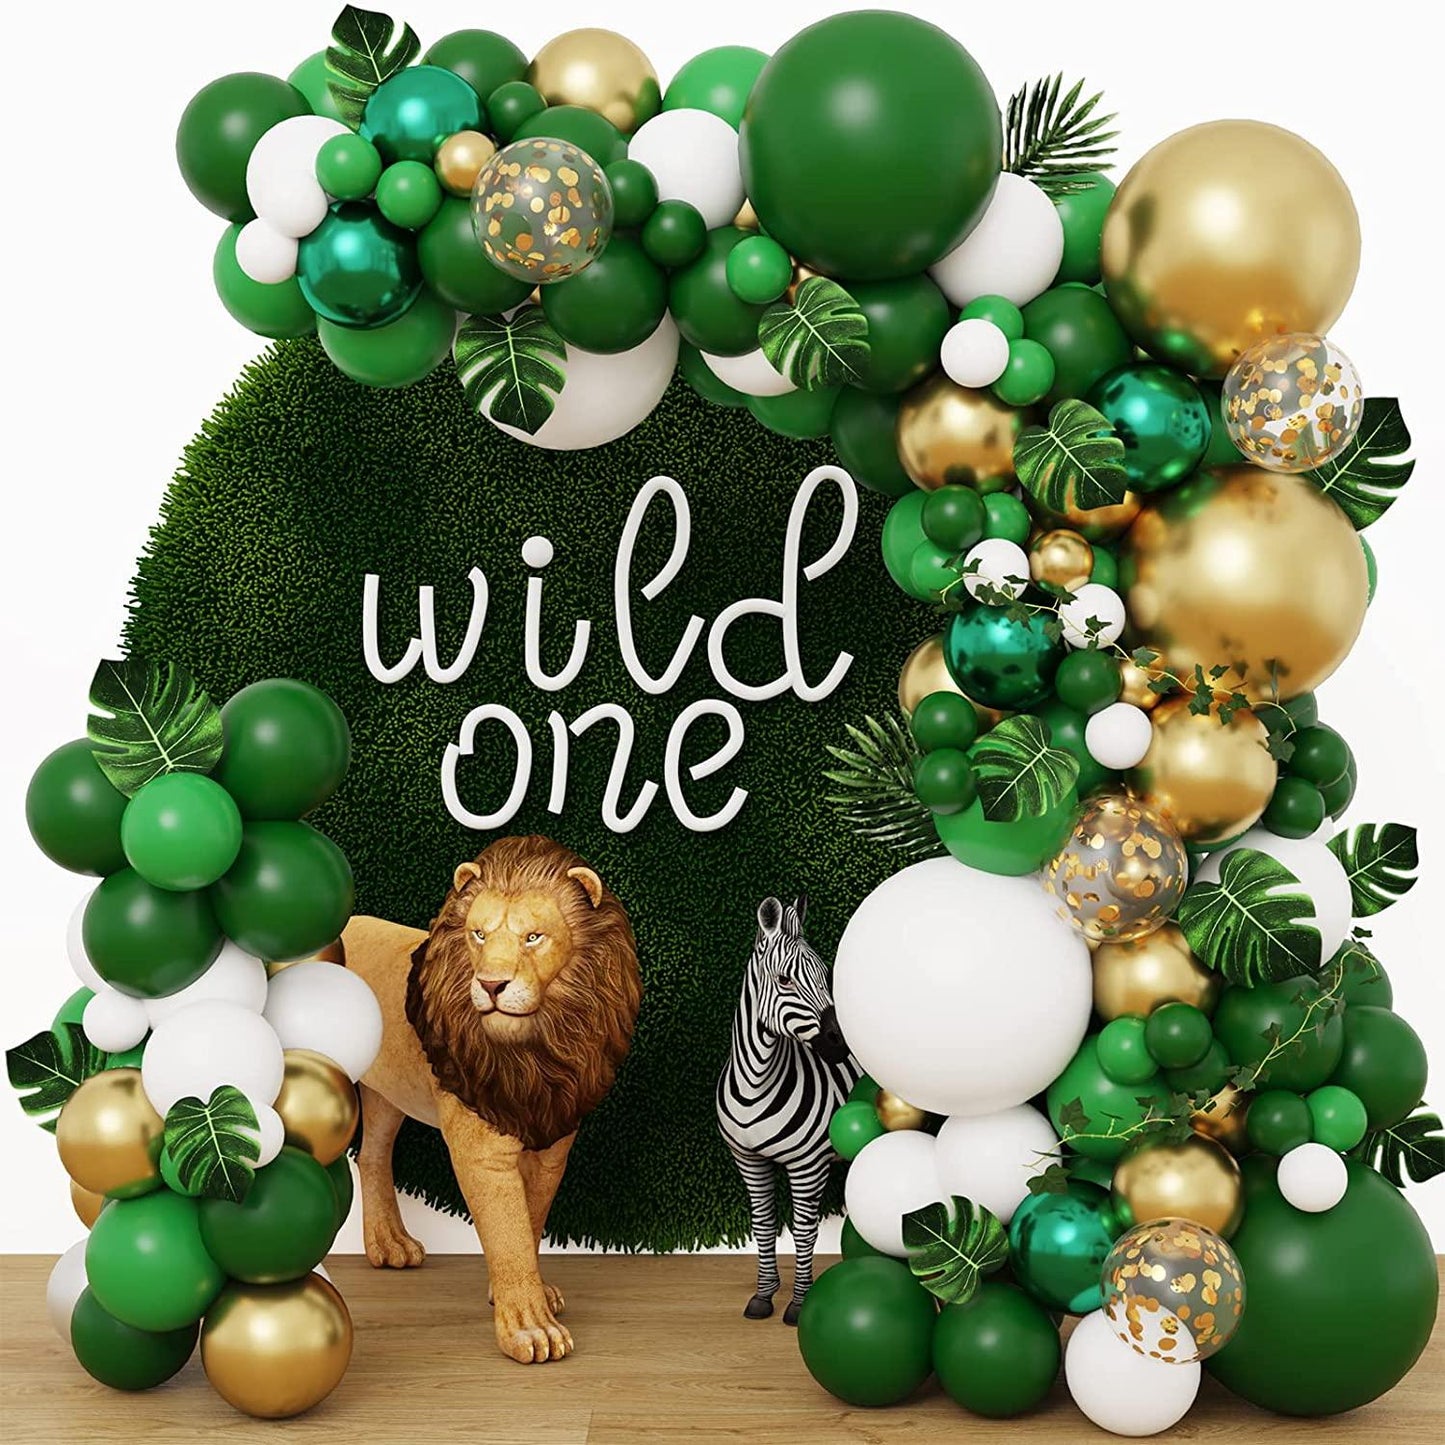 152pcs Jungle Party Balloons Garland Arch Kit Green Gold Balloon Arch Tropical Theme Party Decorations - If you say i do